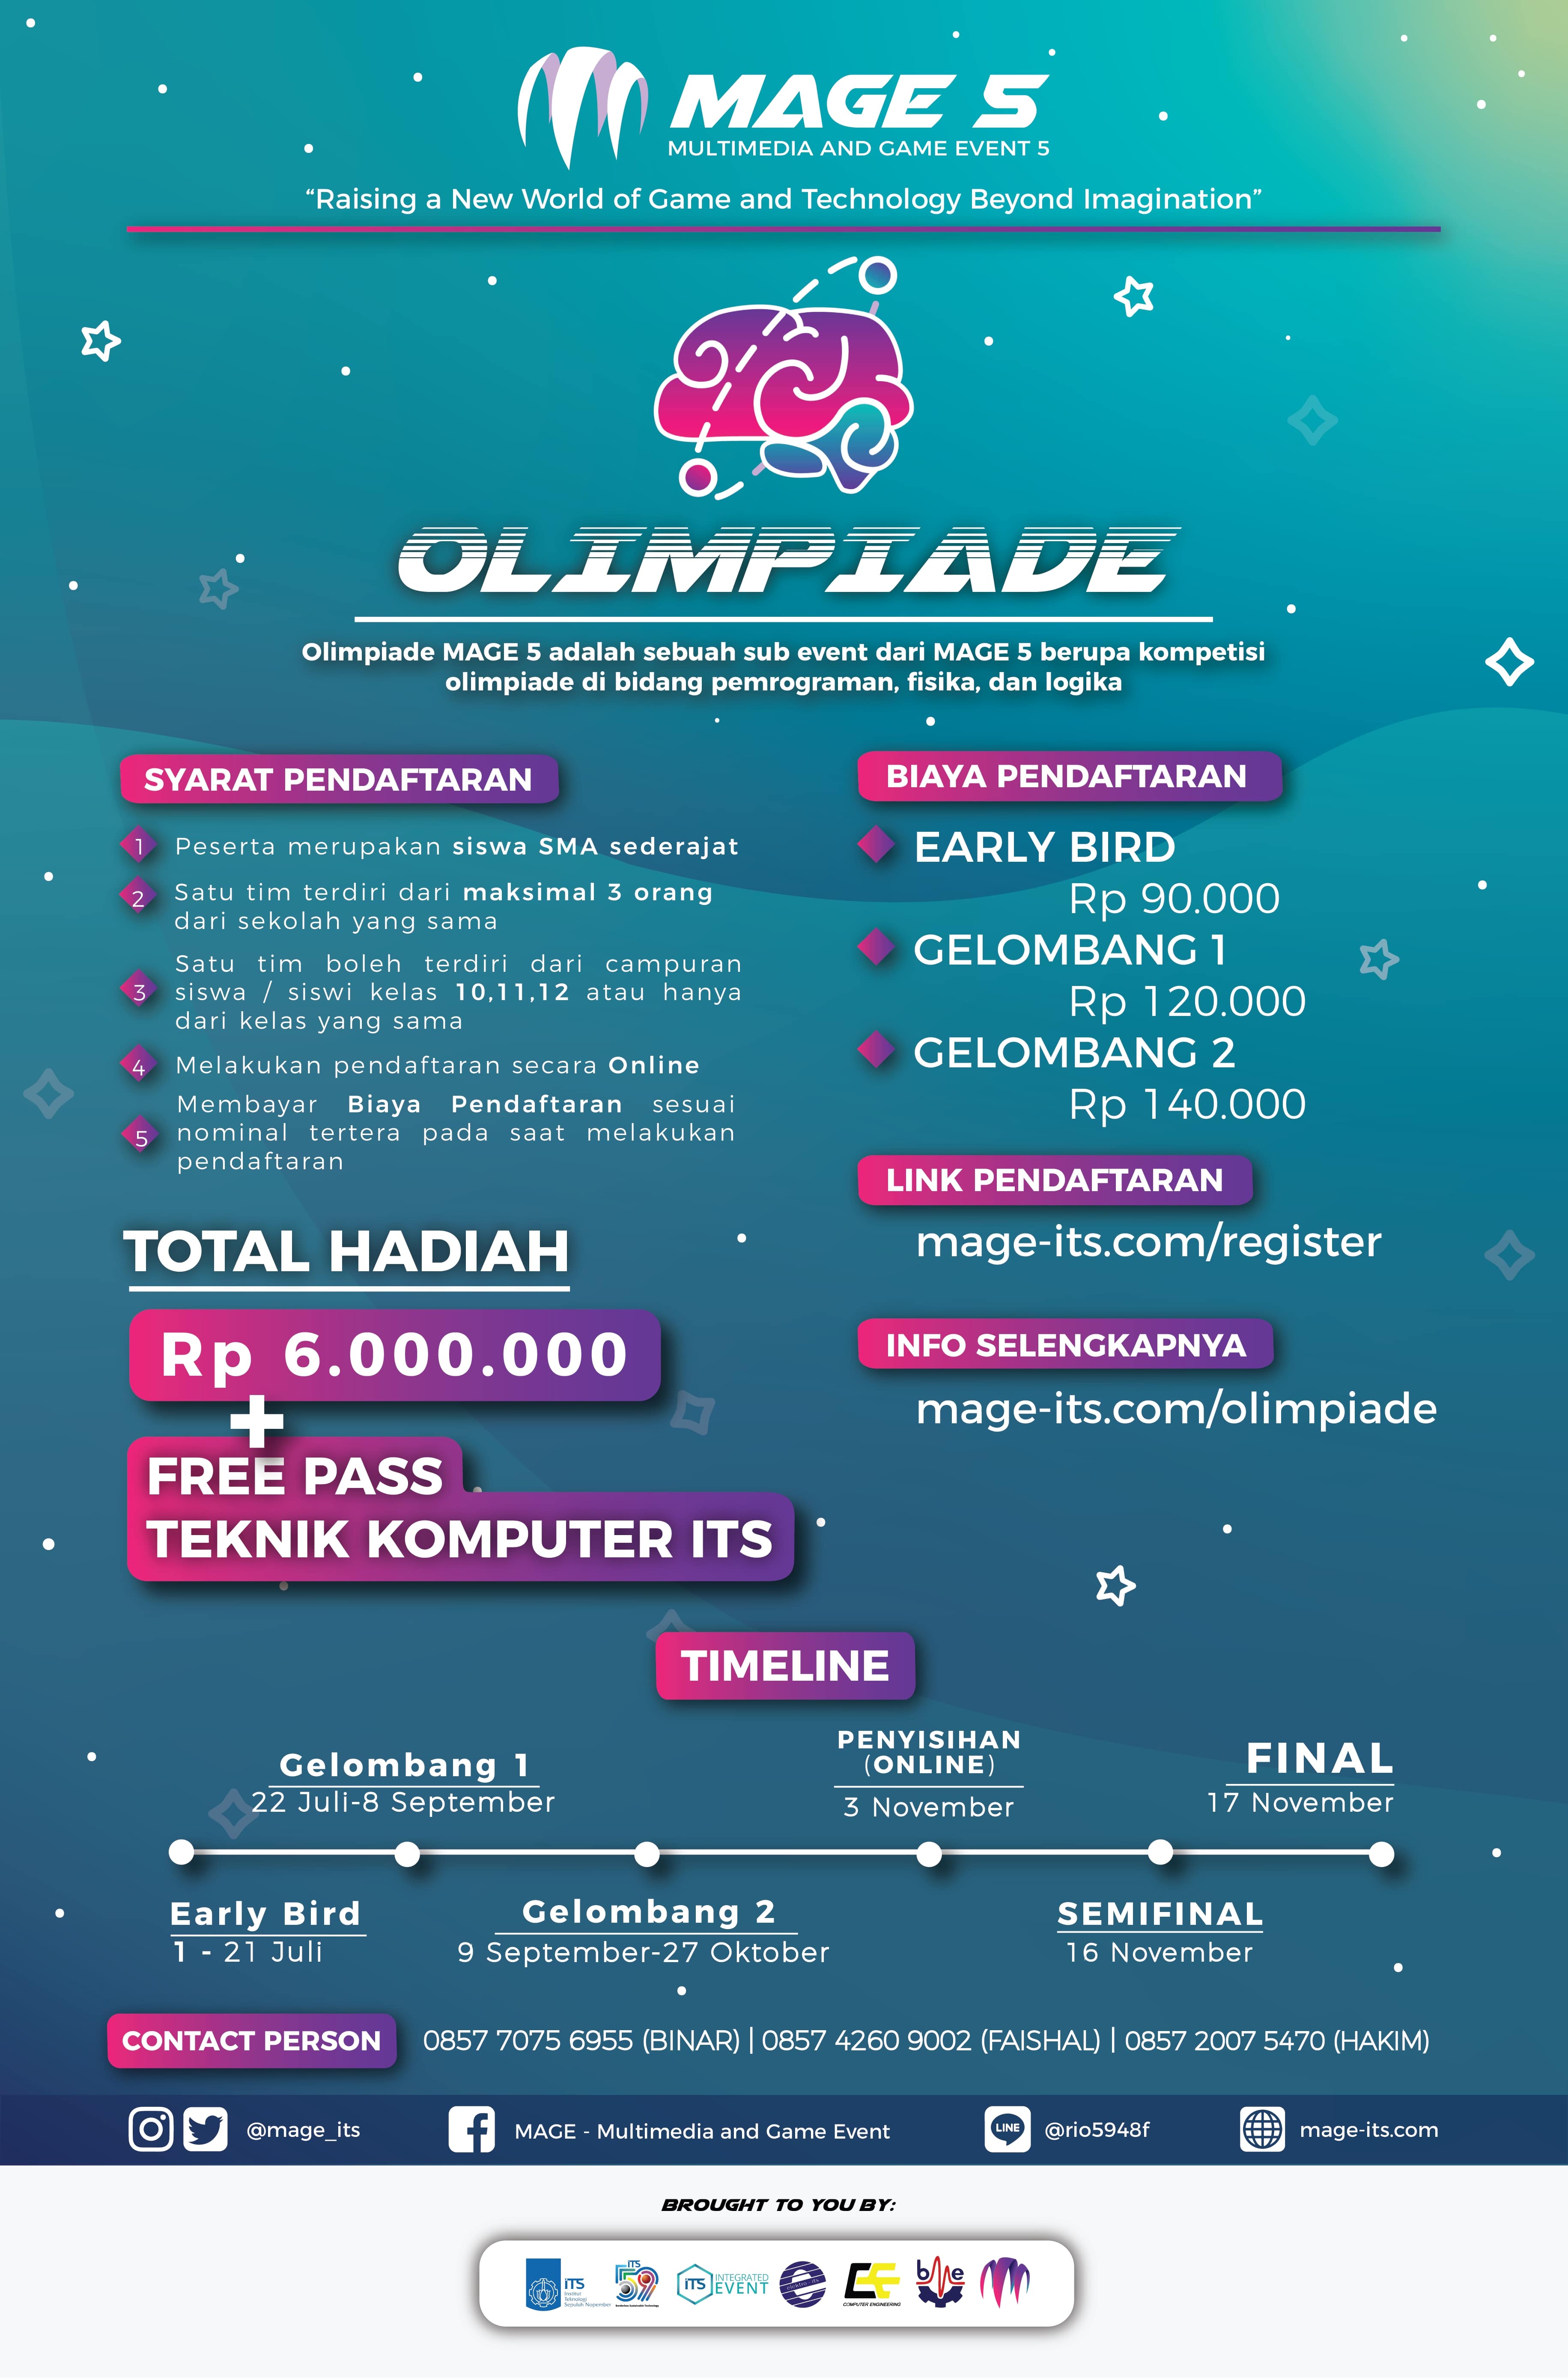 Olimpiade MAGE 5 - Multimedia and Game Event